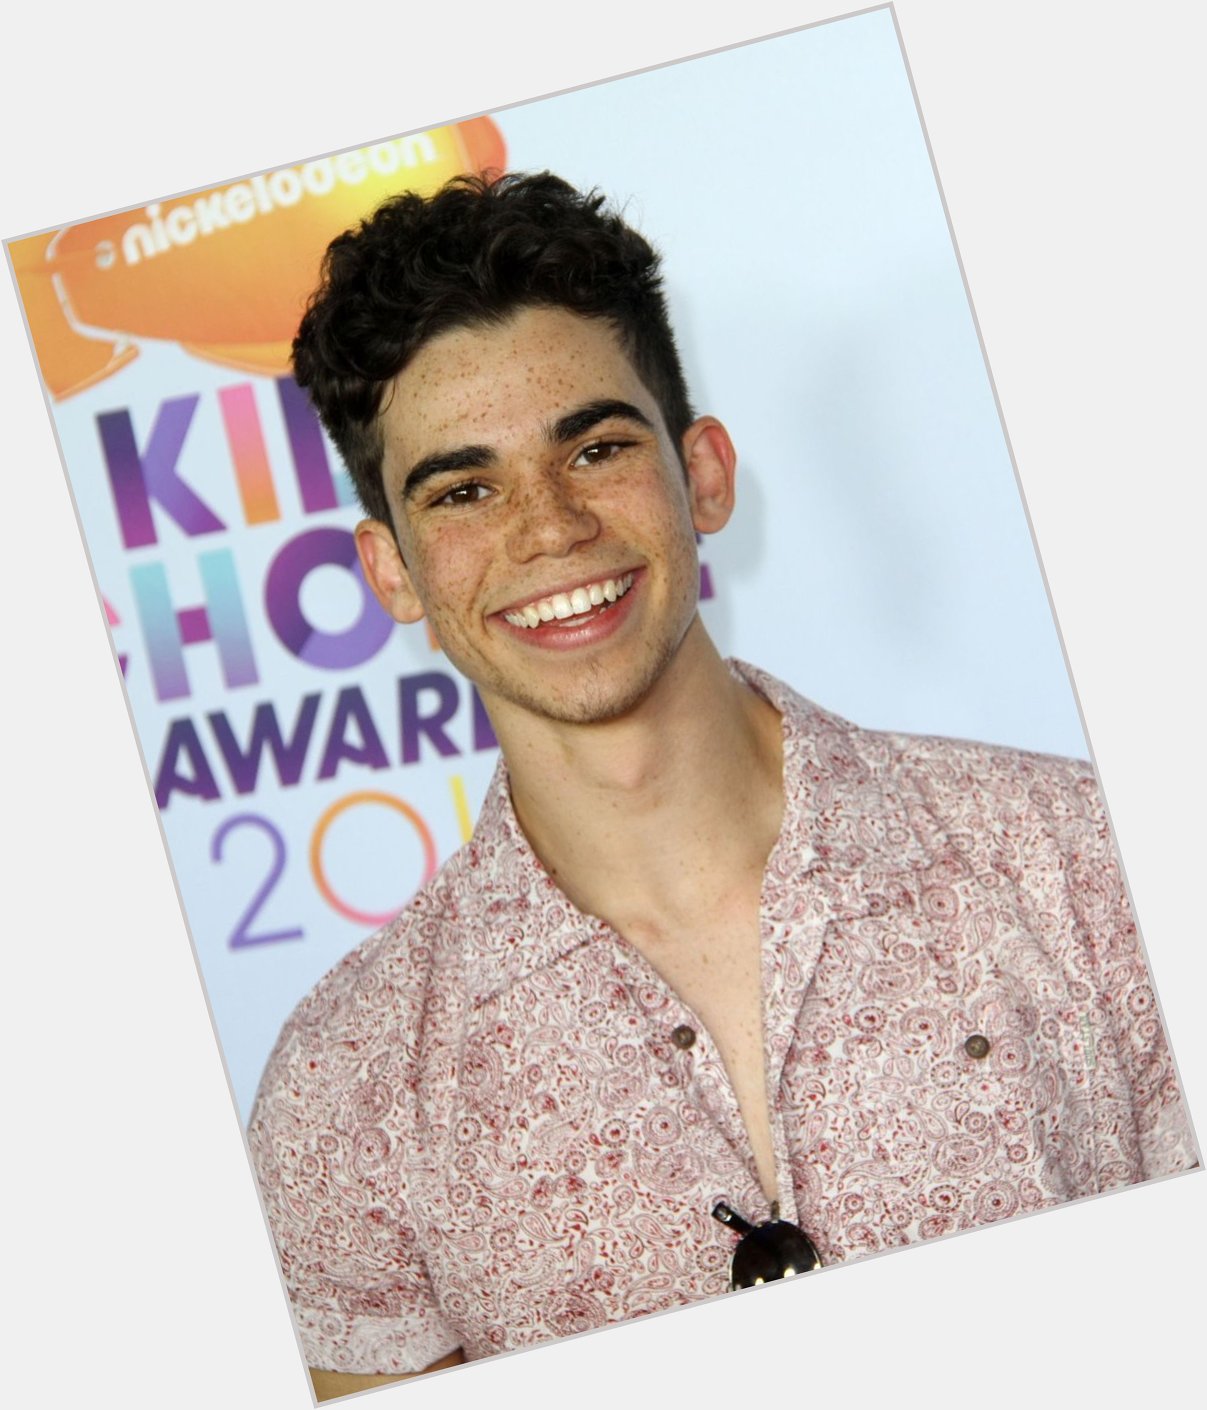 Cameron Boyce would have turned 22 today. Happy birthday, angel! Rest in peace 